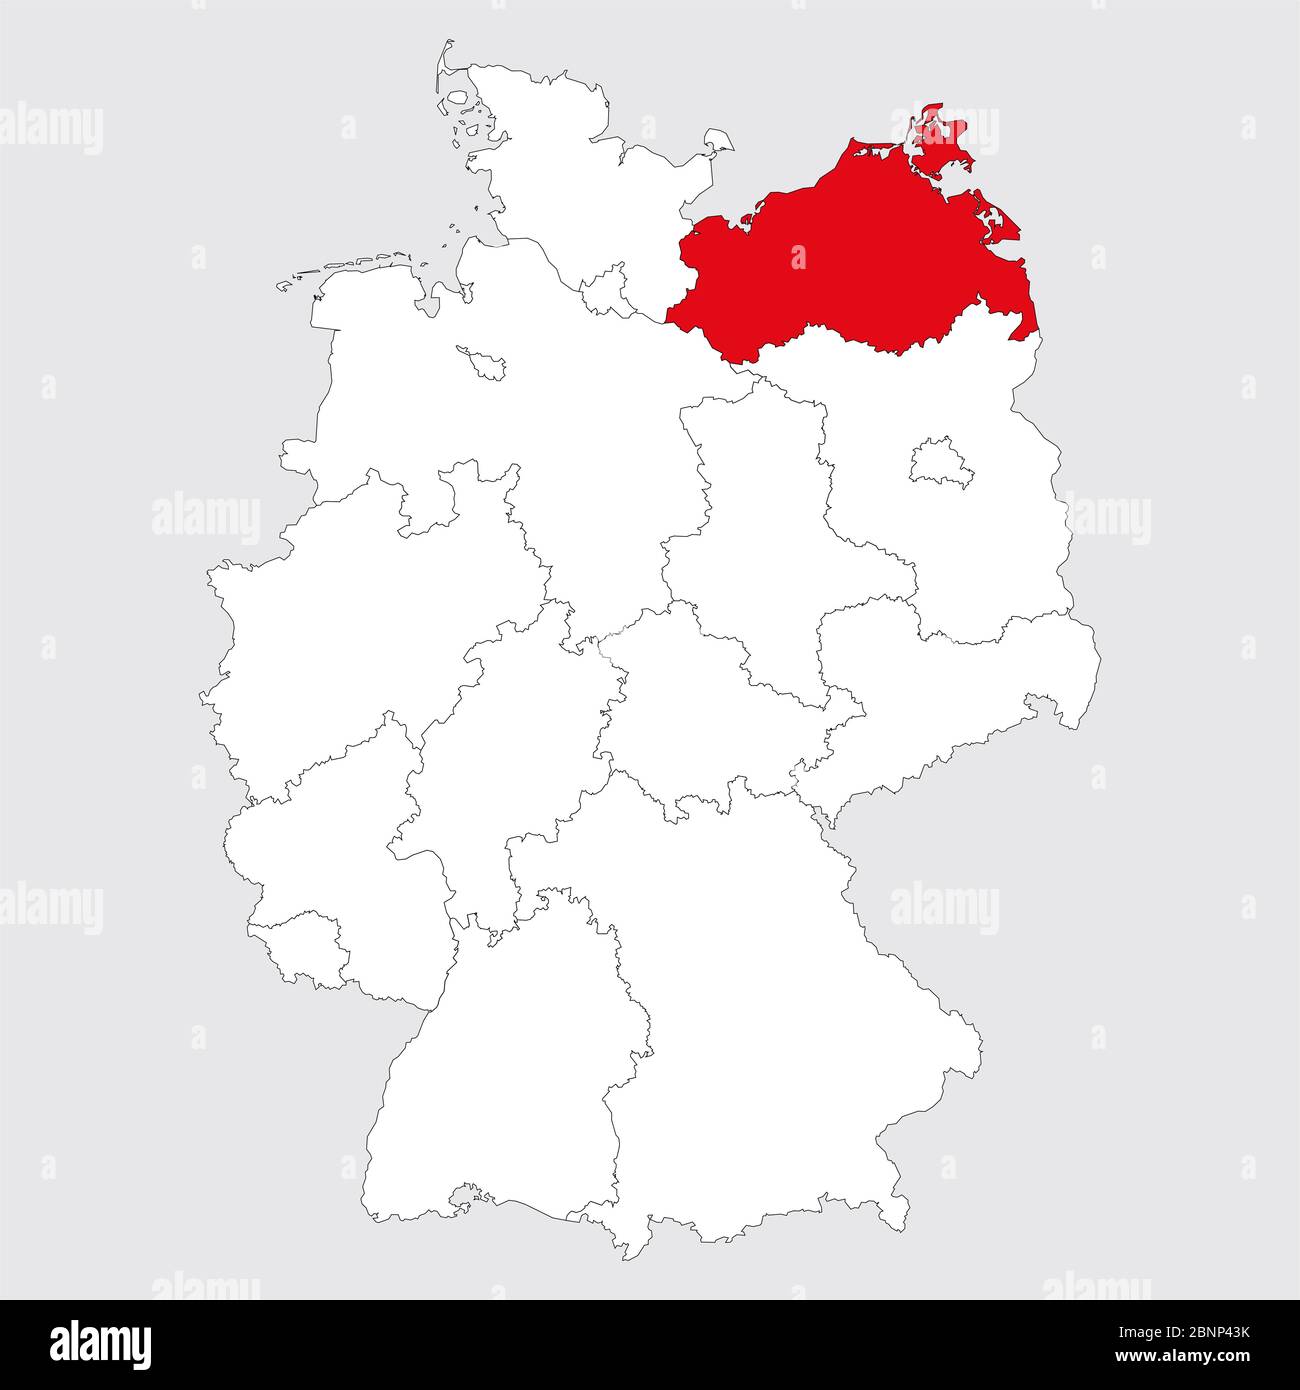 Mecklenburg vorpommern province highlighted red on germany map. Gray background. German political map. Stock Vector